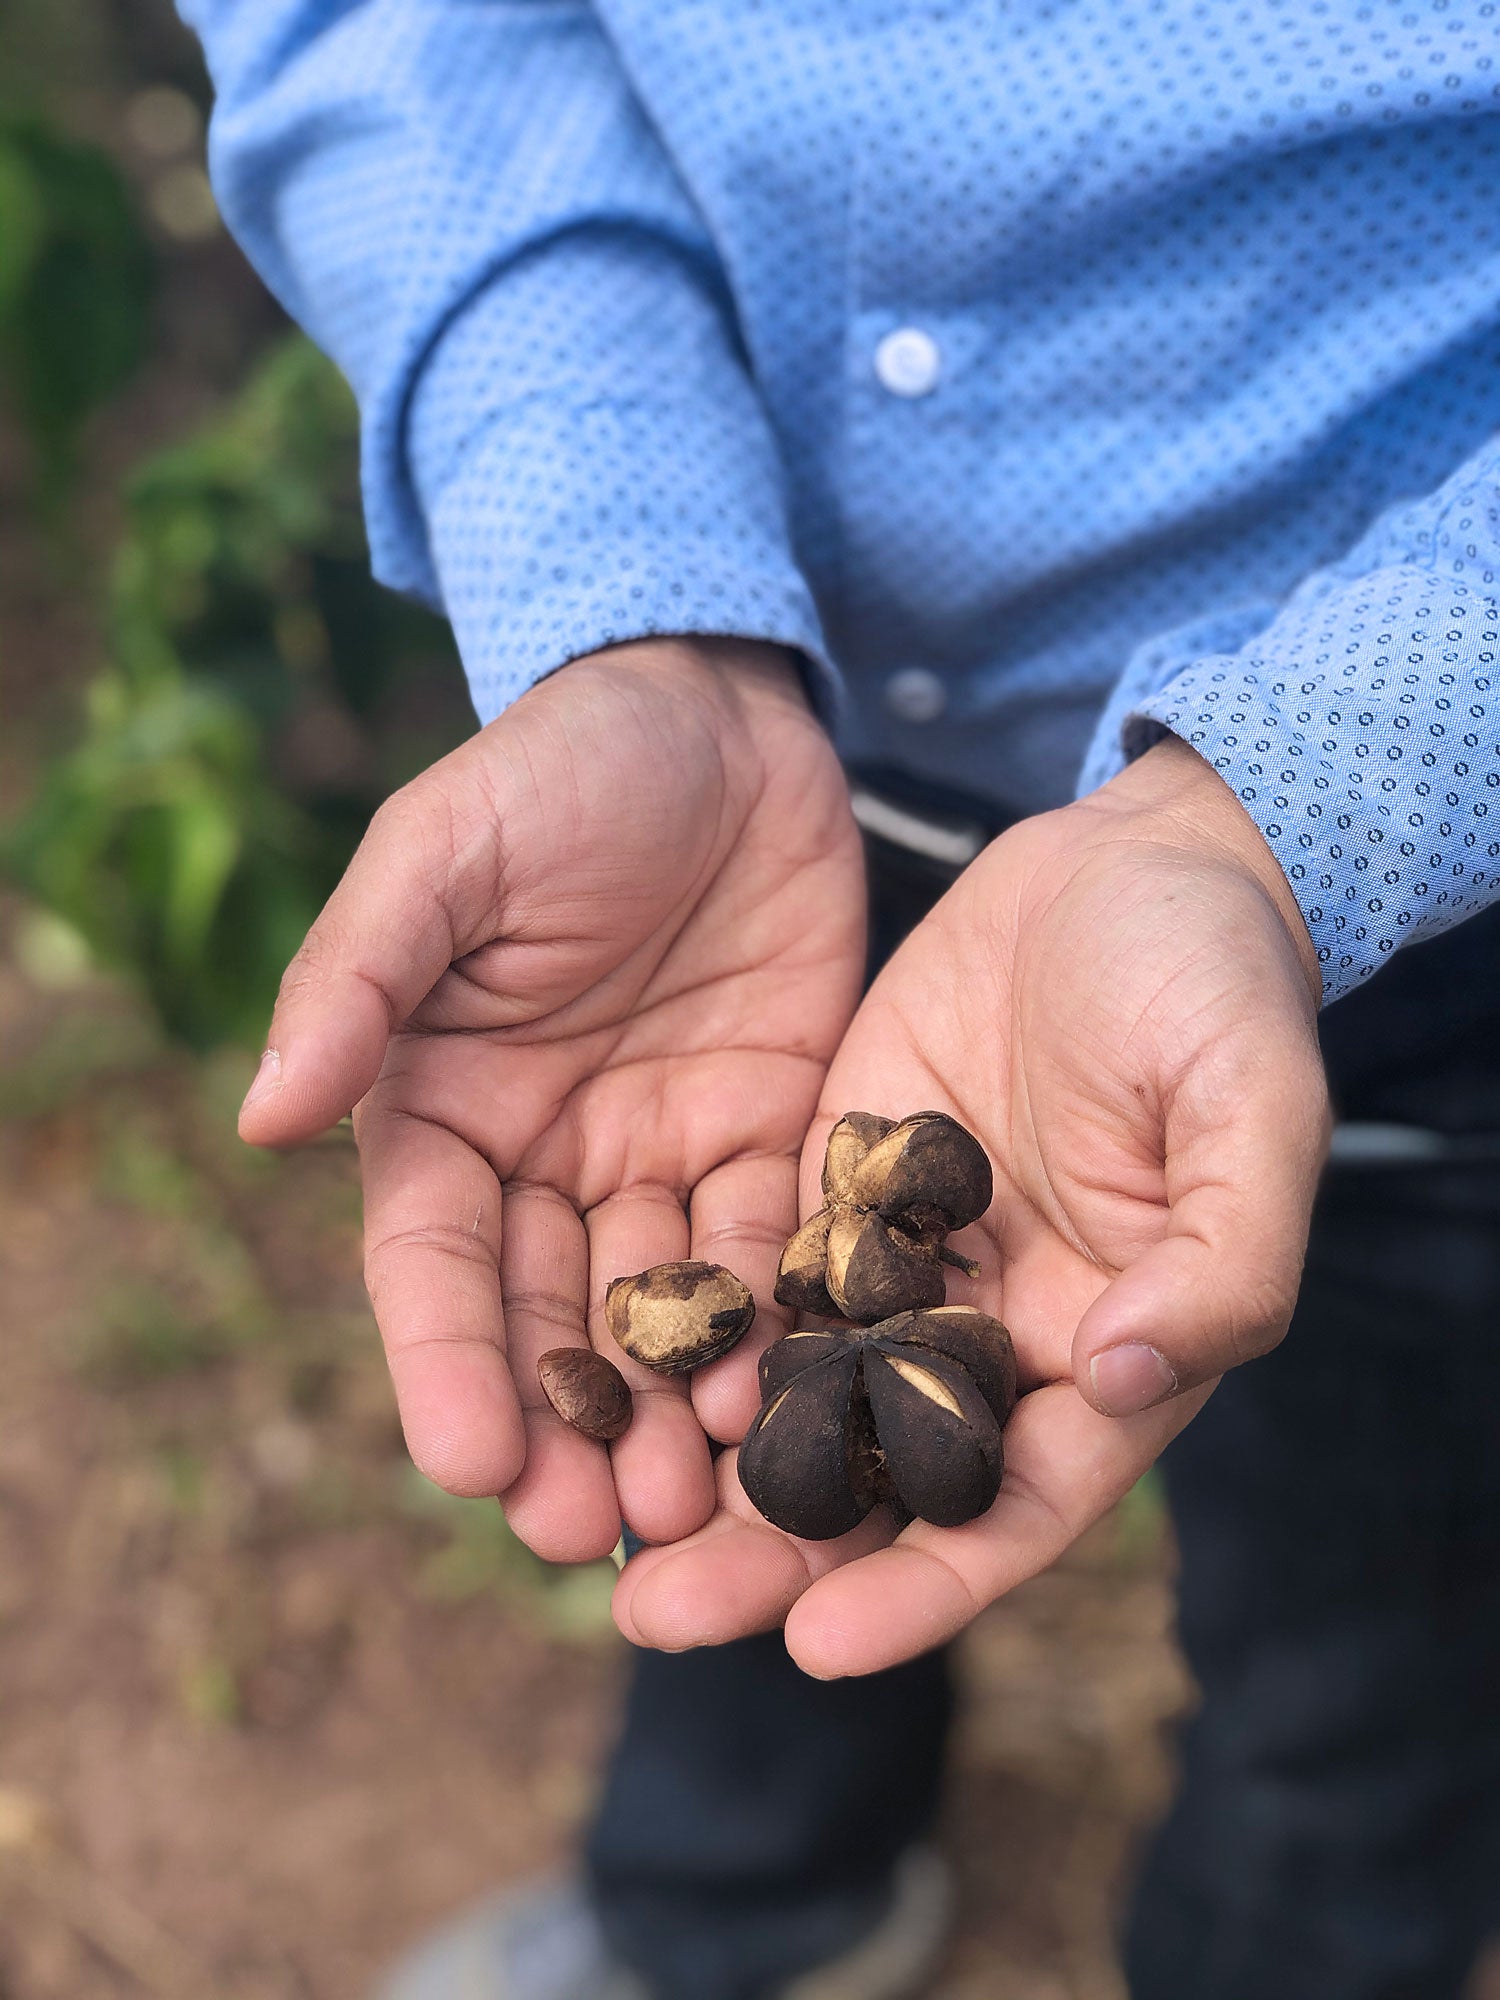 Sandeep holding a few sacha inchi pods in his hands. One is broken open showing the seed inside.